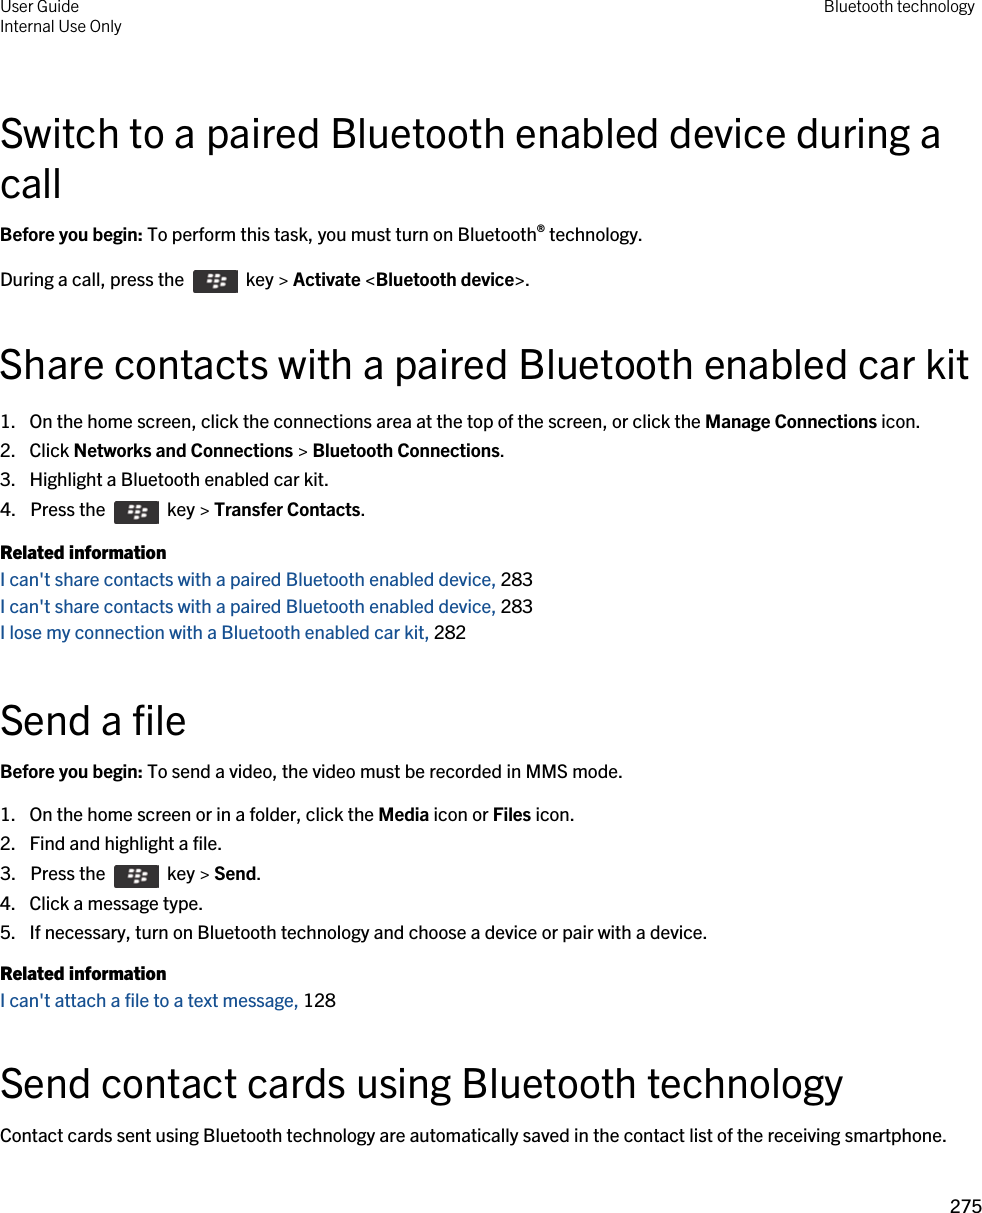 Switch to a paired Bluetooth enabled device during a callBefore you begin: To perform this task, you must turn on Bluetooth® technology.During a call, press the    key &gt; Activate &lt;Bluetooth device&gt;.Share contacts with a paired Bluetooth enabled car kit1. On the home screen, click the connections area at the top of the screen, or click the Manage Connections icon.2. Click Networks and Connections &gt; Bluetooth Connections.3. Highlight a Bluetooth enabled car kit.4.  Press the    key &gt; Transfer Contacts. Related informationI can&apos;t share contacts with a paired Bluetooth enabled device, 283I can&apos;t share contacts with a paired Bluetooth enabled device, 283I lose my connection with a Bluetooth enabled car kit, 282Send a fileBefore you begin: To send a video, the video must be recorded in MMS mode.1. On the home screen or in a folder, click the Media icon or Files icon.2. Find and highlight a file.3.  Press the    key &gt; Send. 4. Click a message type.5. If necessary, turn on Bluetooth technology and choose a device or pair with a device.Related informationI can&apos;t attach a file to a text message, 128 Send contact cards using Bluetooth technologyContact cards sent using Bluetooth technology are automatically saved in the contact list of the receiving smartphone.User GuideInternal Use Only Bluetooth technology275 